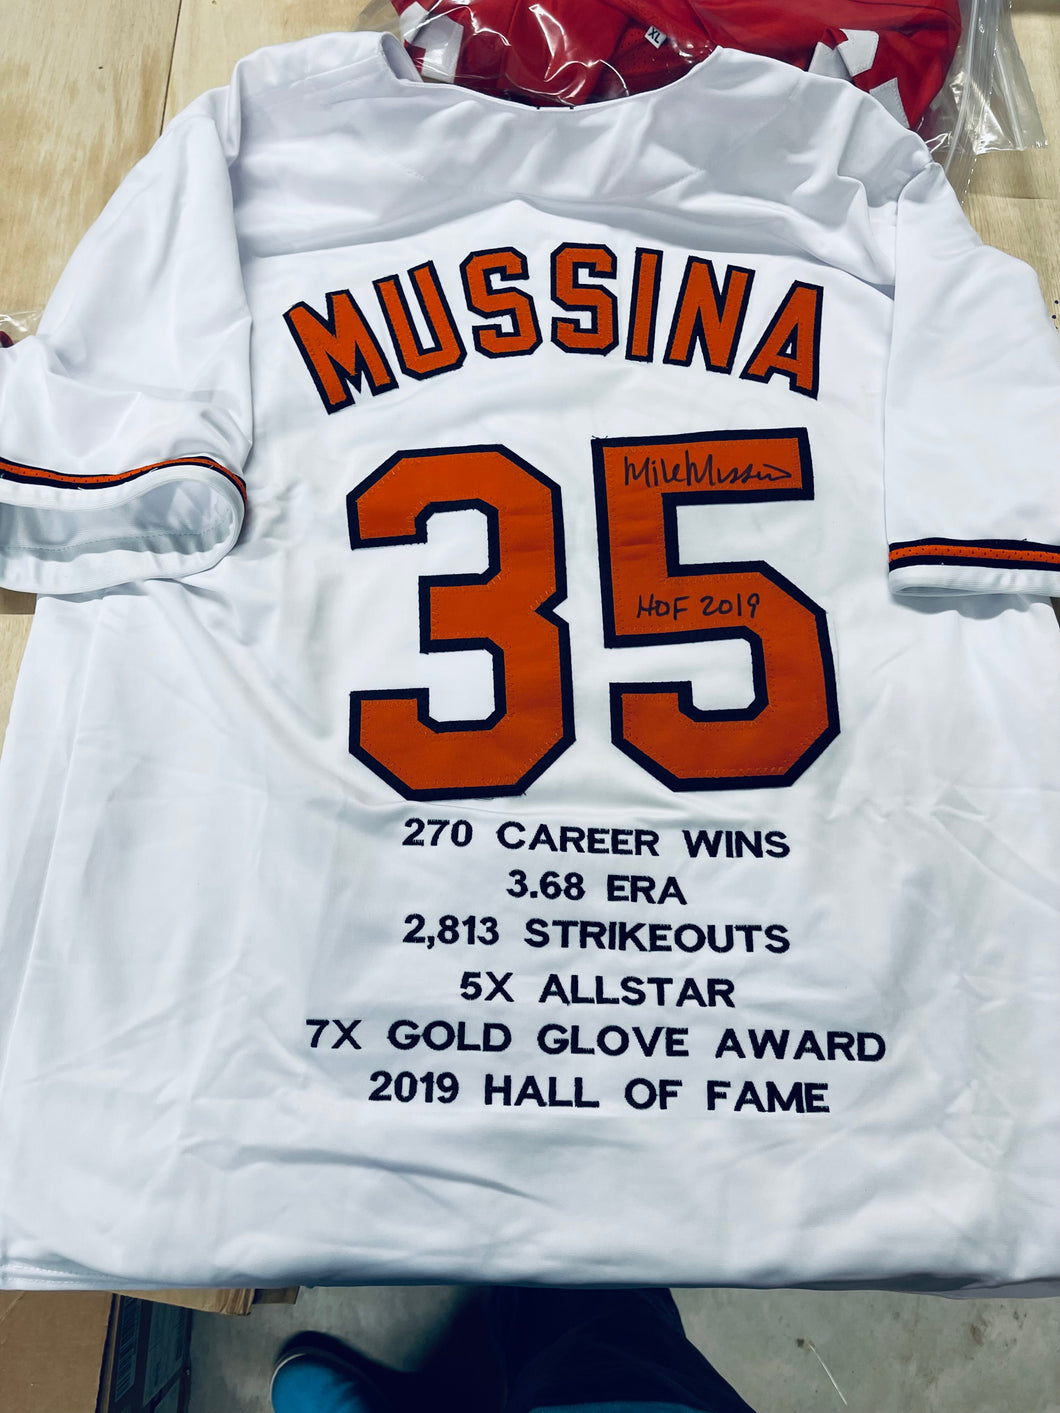 Mike Mussina state jersey